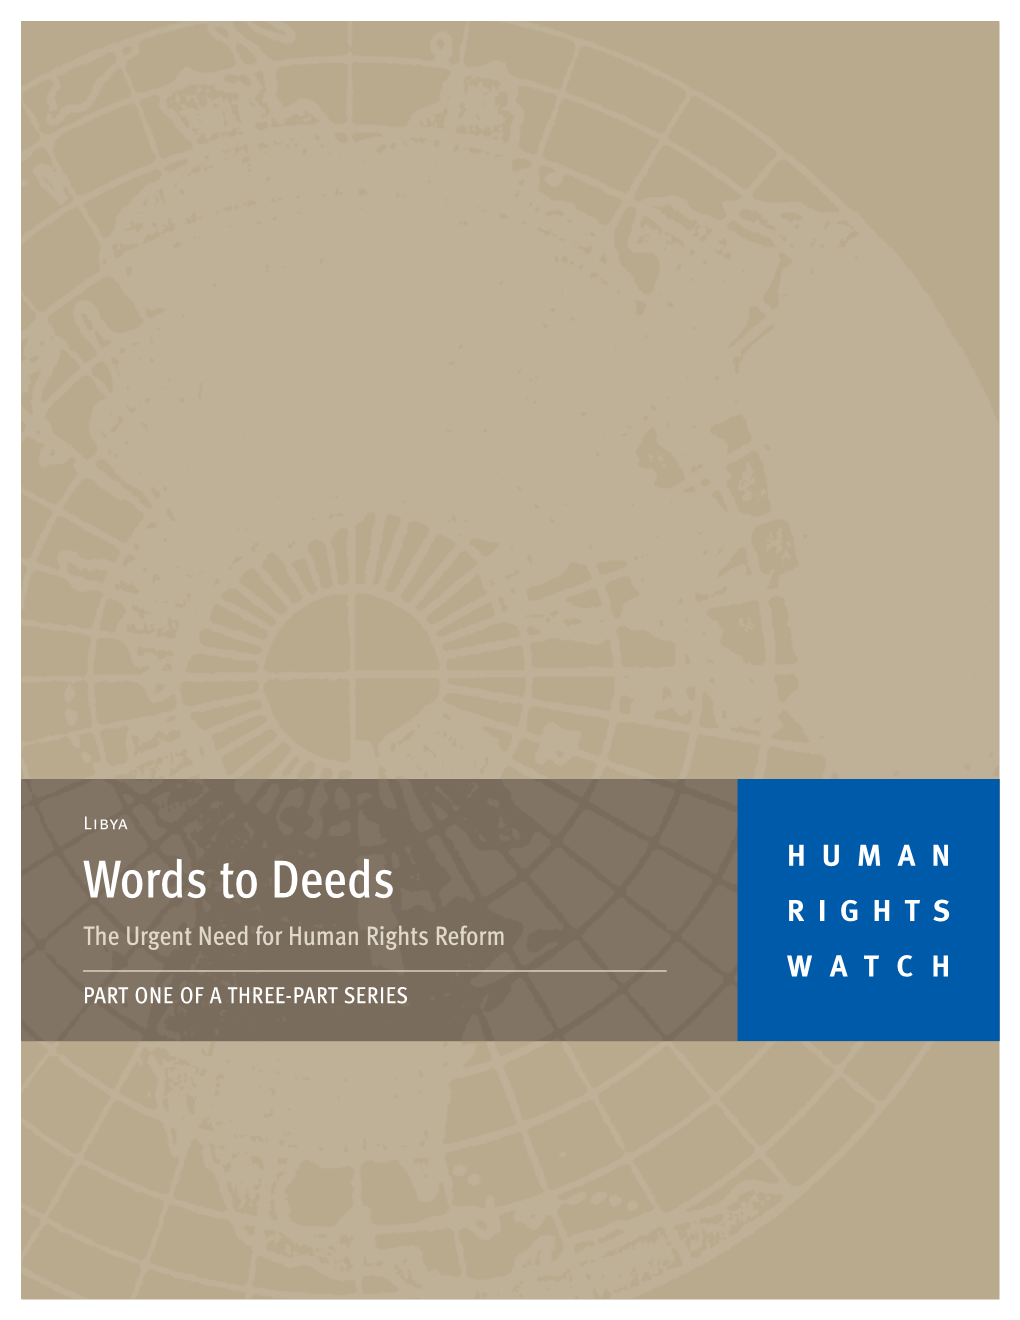 Words to Deeds: Libya's Urgent Need for Human Rights